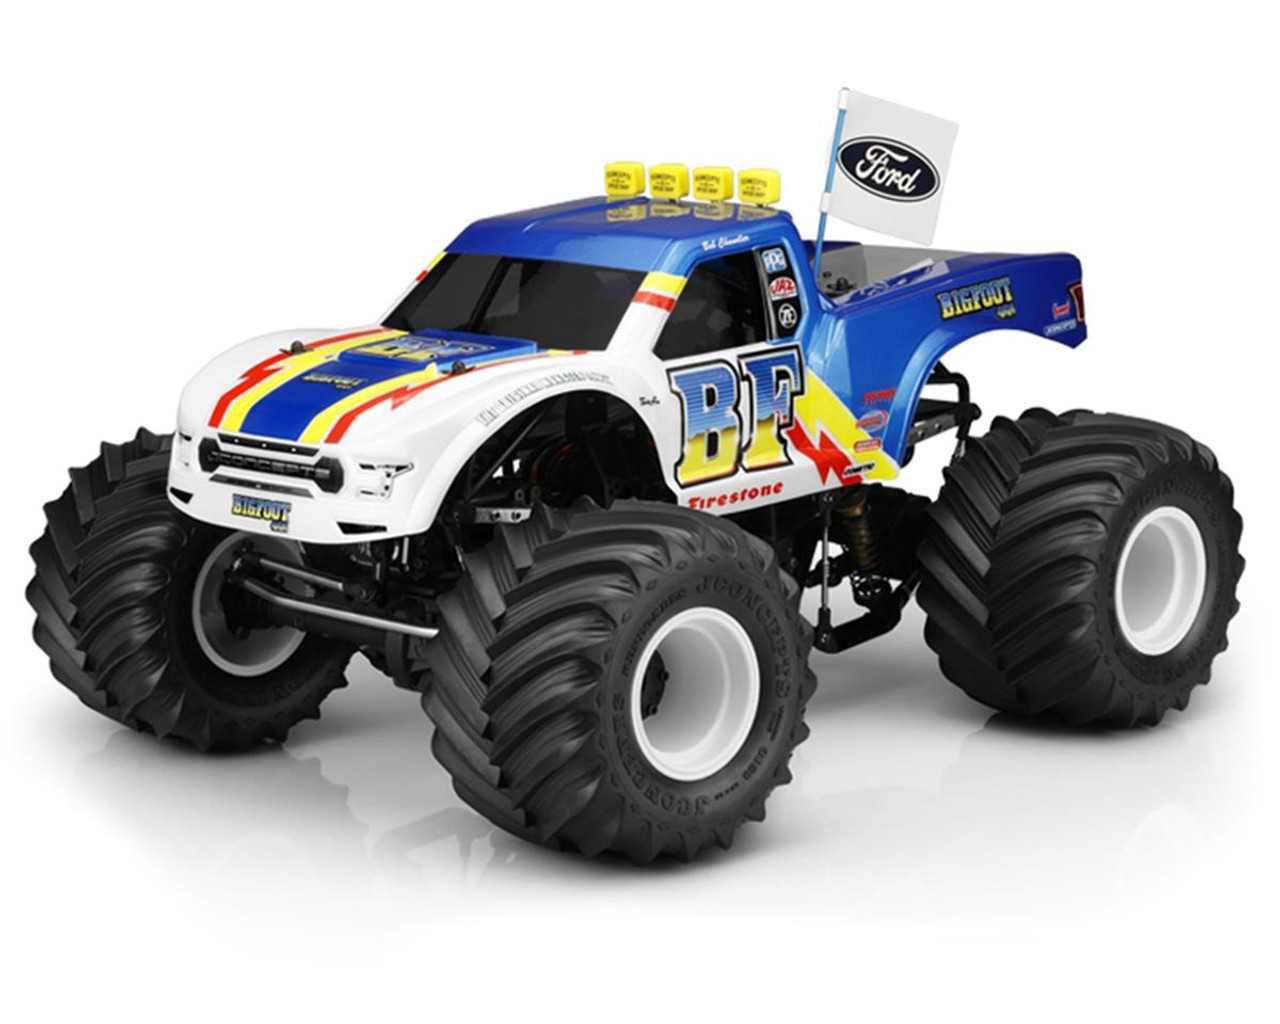 JConcepts 2020 Ford Raptor, BF Power Logo MT Clear Body, Fits Losi LMT / Axial SMT10